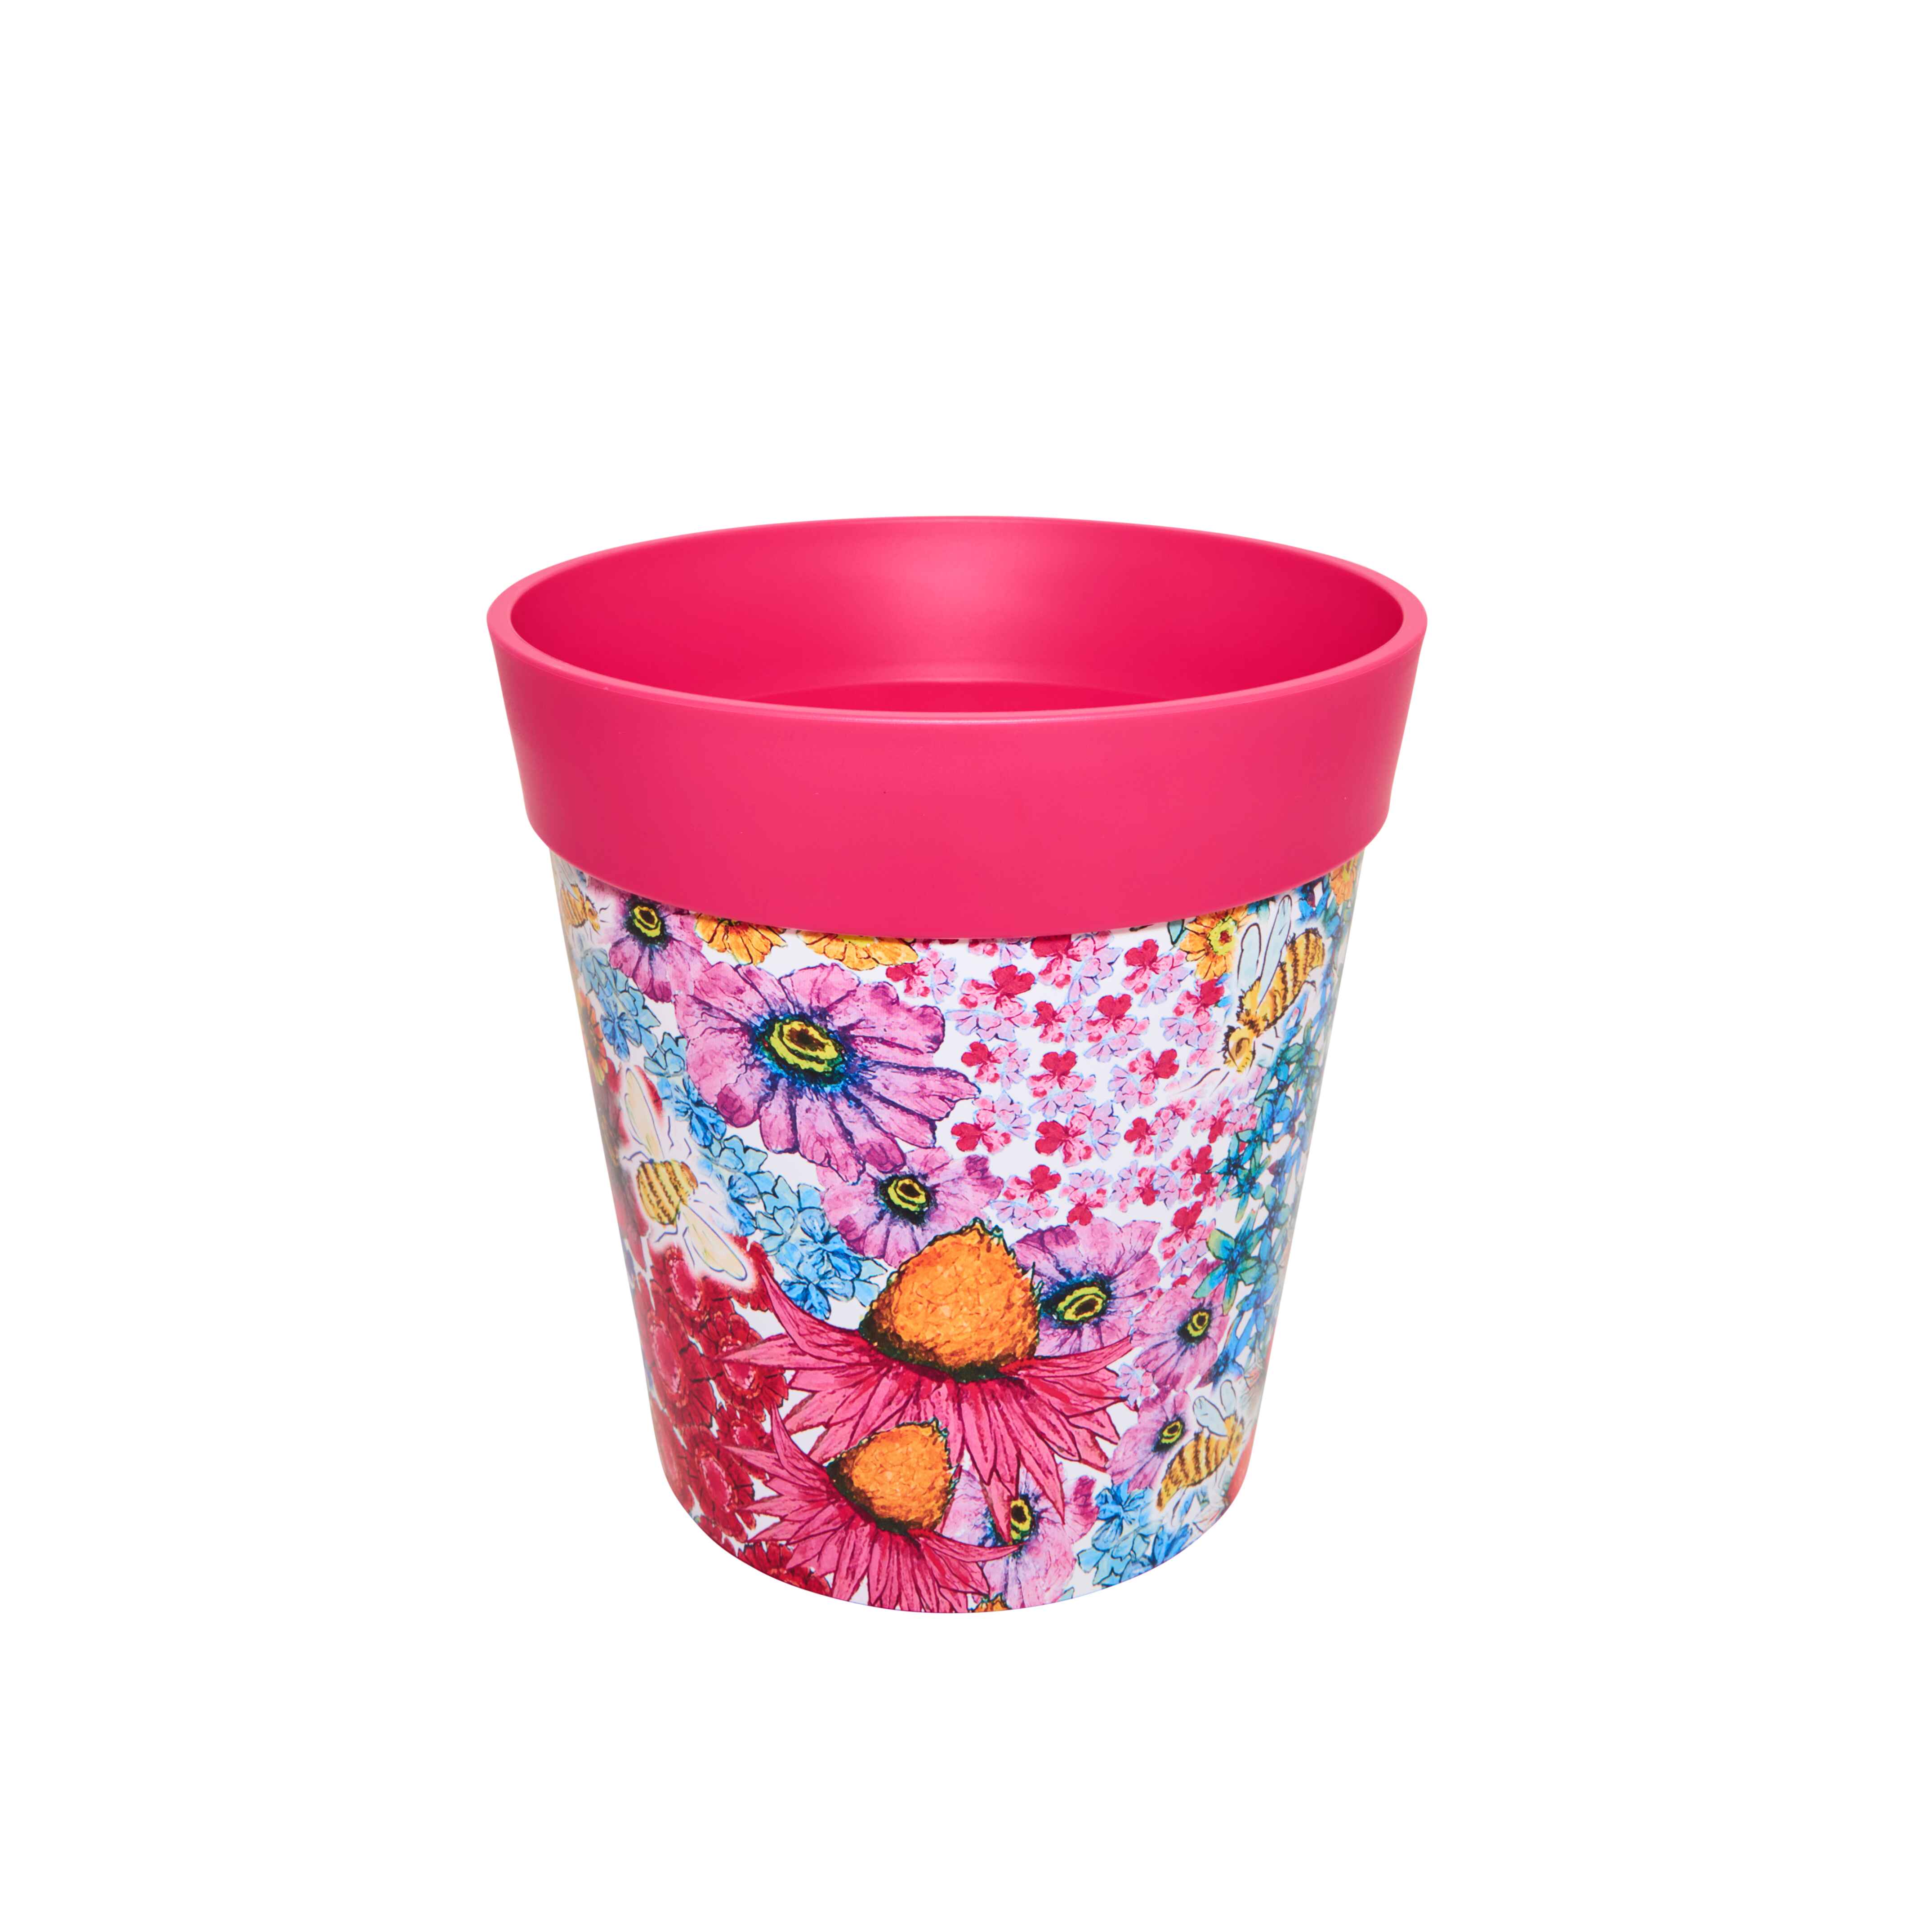 Picture of Medium 22cm Plastic Pink Flowers and Bees Pattern Indoor/Outdoor Flower Pots 